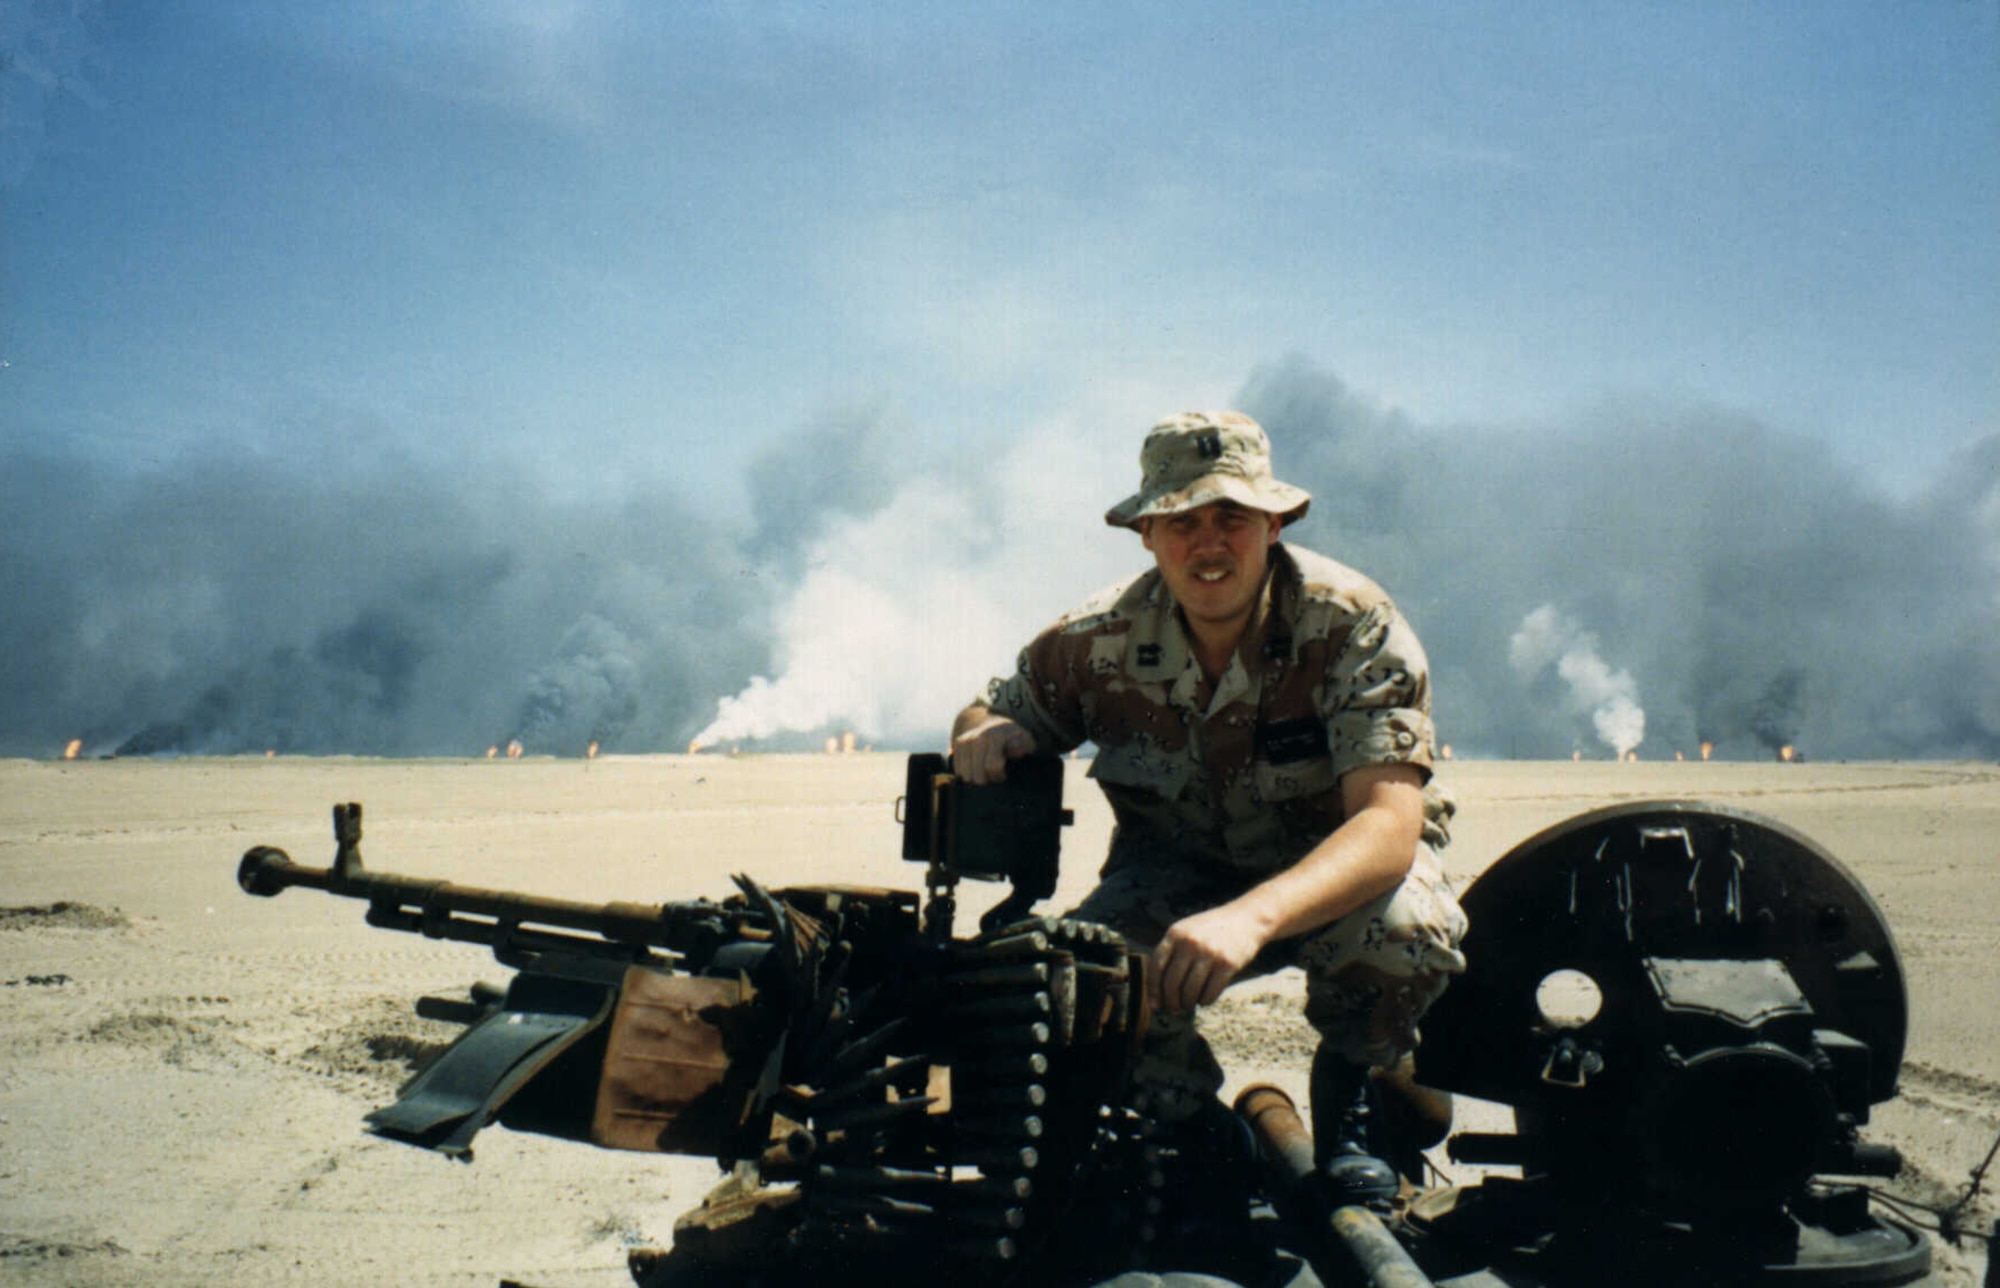 Wayland Patterson, AFCEC Readiness Directorate, sits atop a Russian tank in northern Kuwait in 1991 as oil wells set afire by a retreating Iraqi army burn.  Patterson deployed to Riyadh, Saudi Arabia, as a captain and chief of readiness for the engineering directorate in August 1990 as part of U.S. Central Command Air Force. (Courtesy photo)